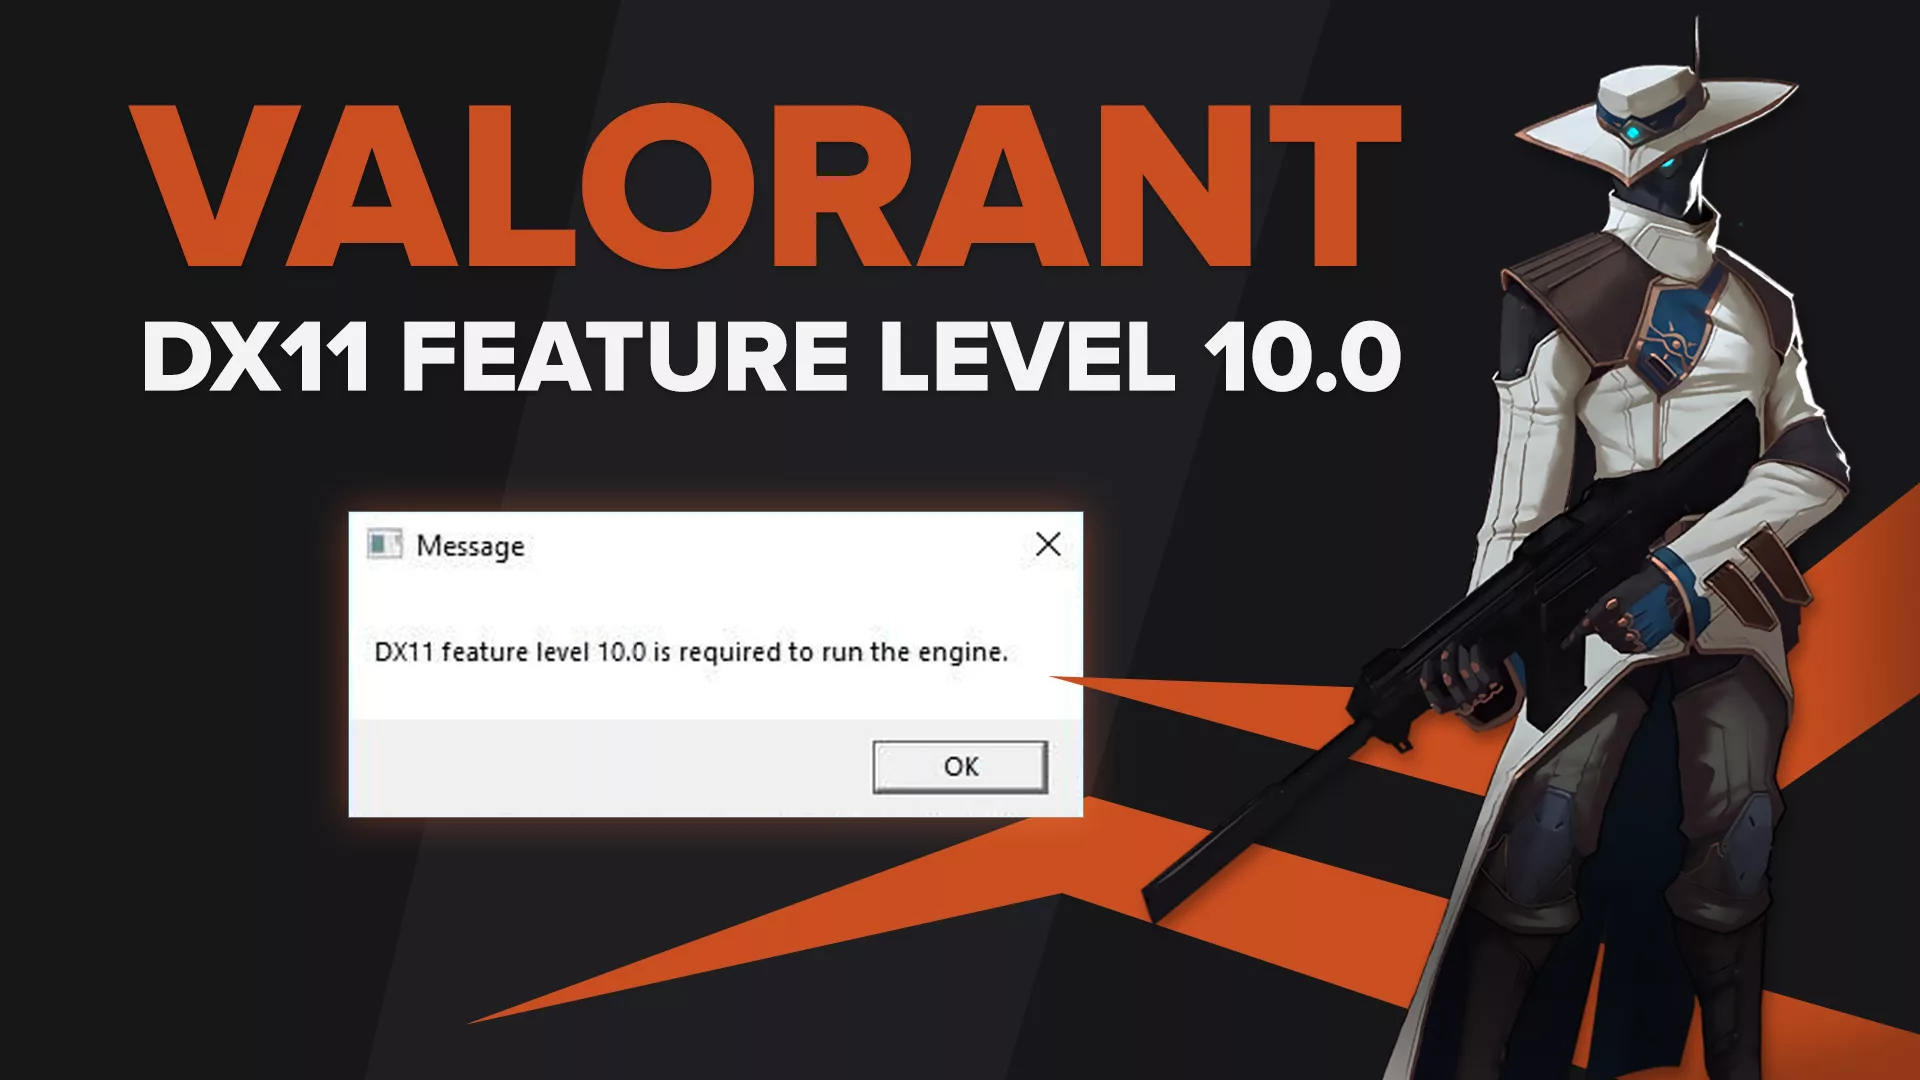 How to Fix DX11 Feature Level 10.0 Is Required to Run the Engine Error in Valorant